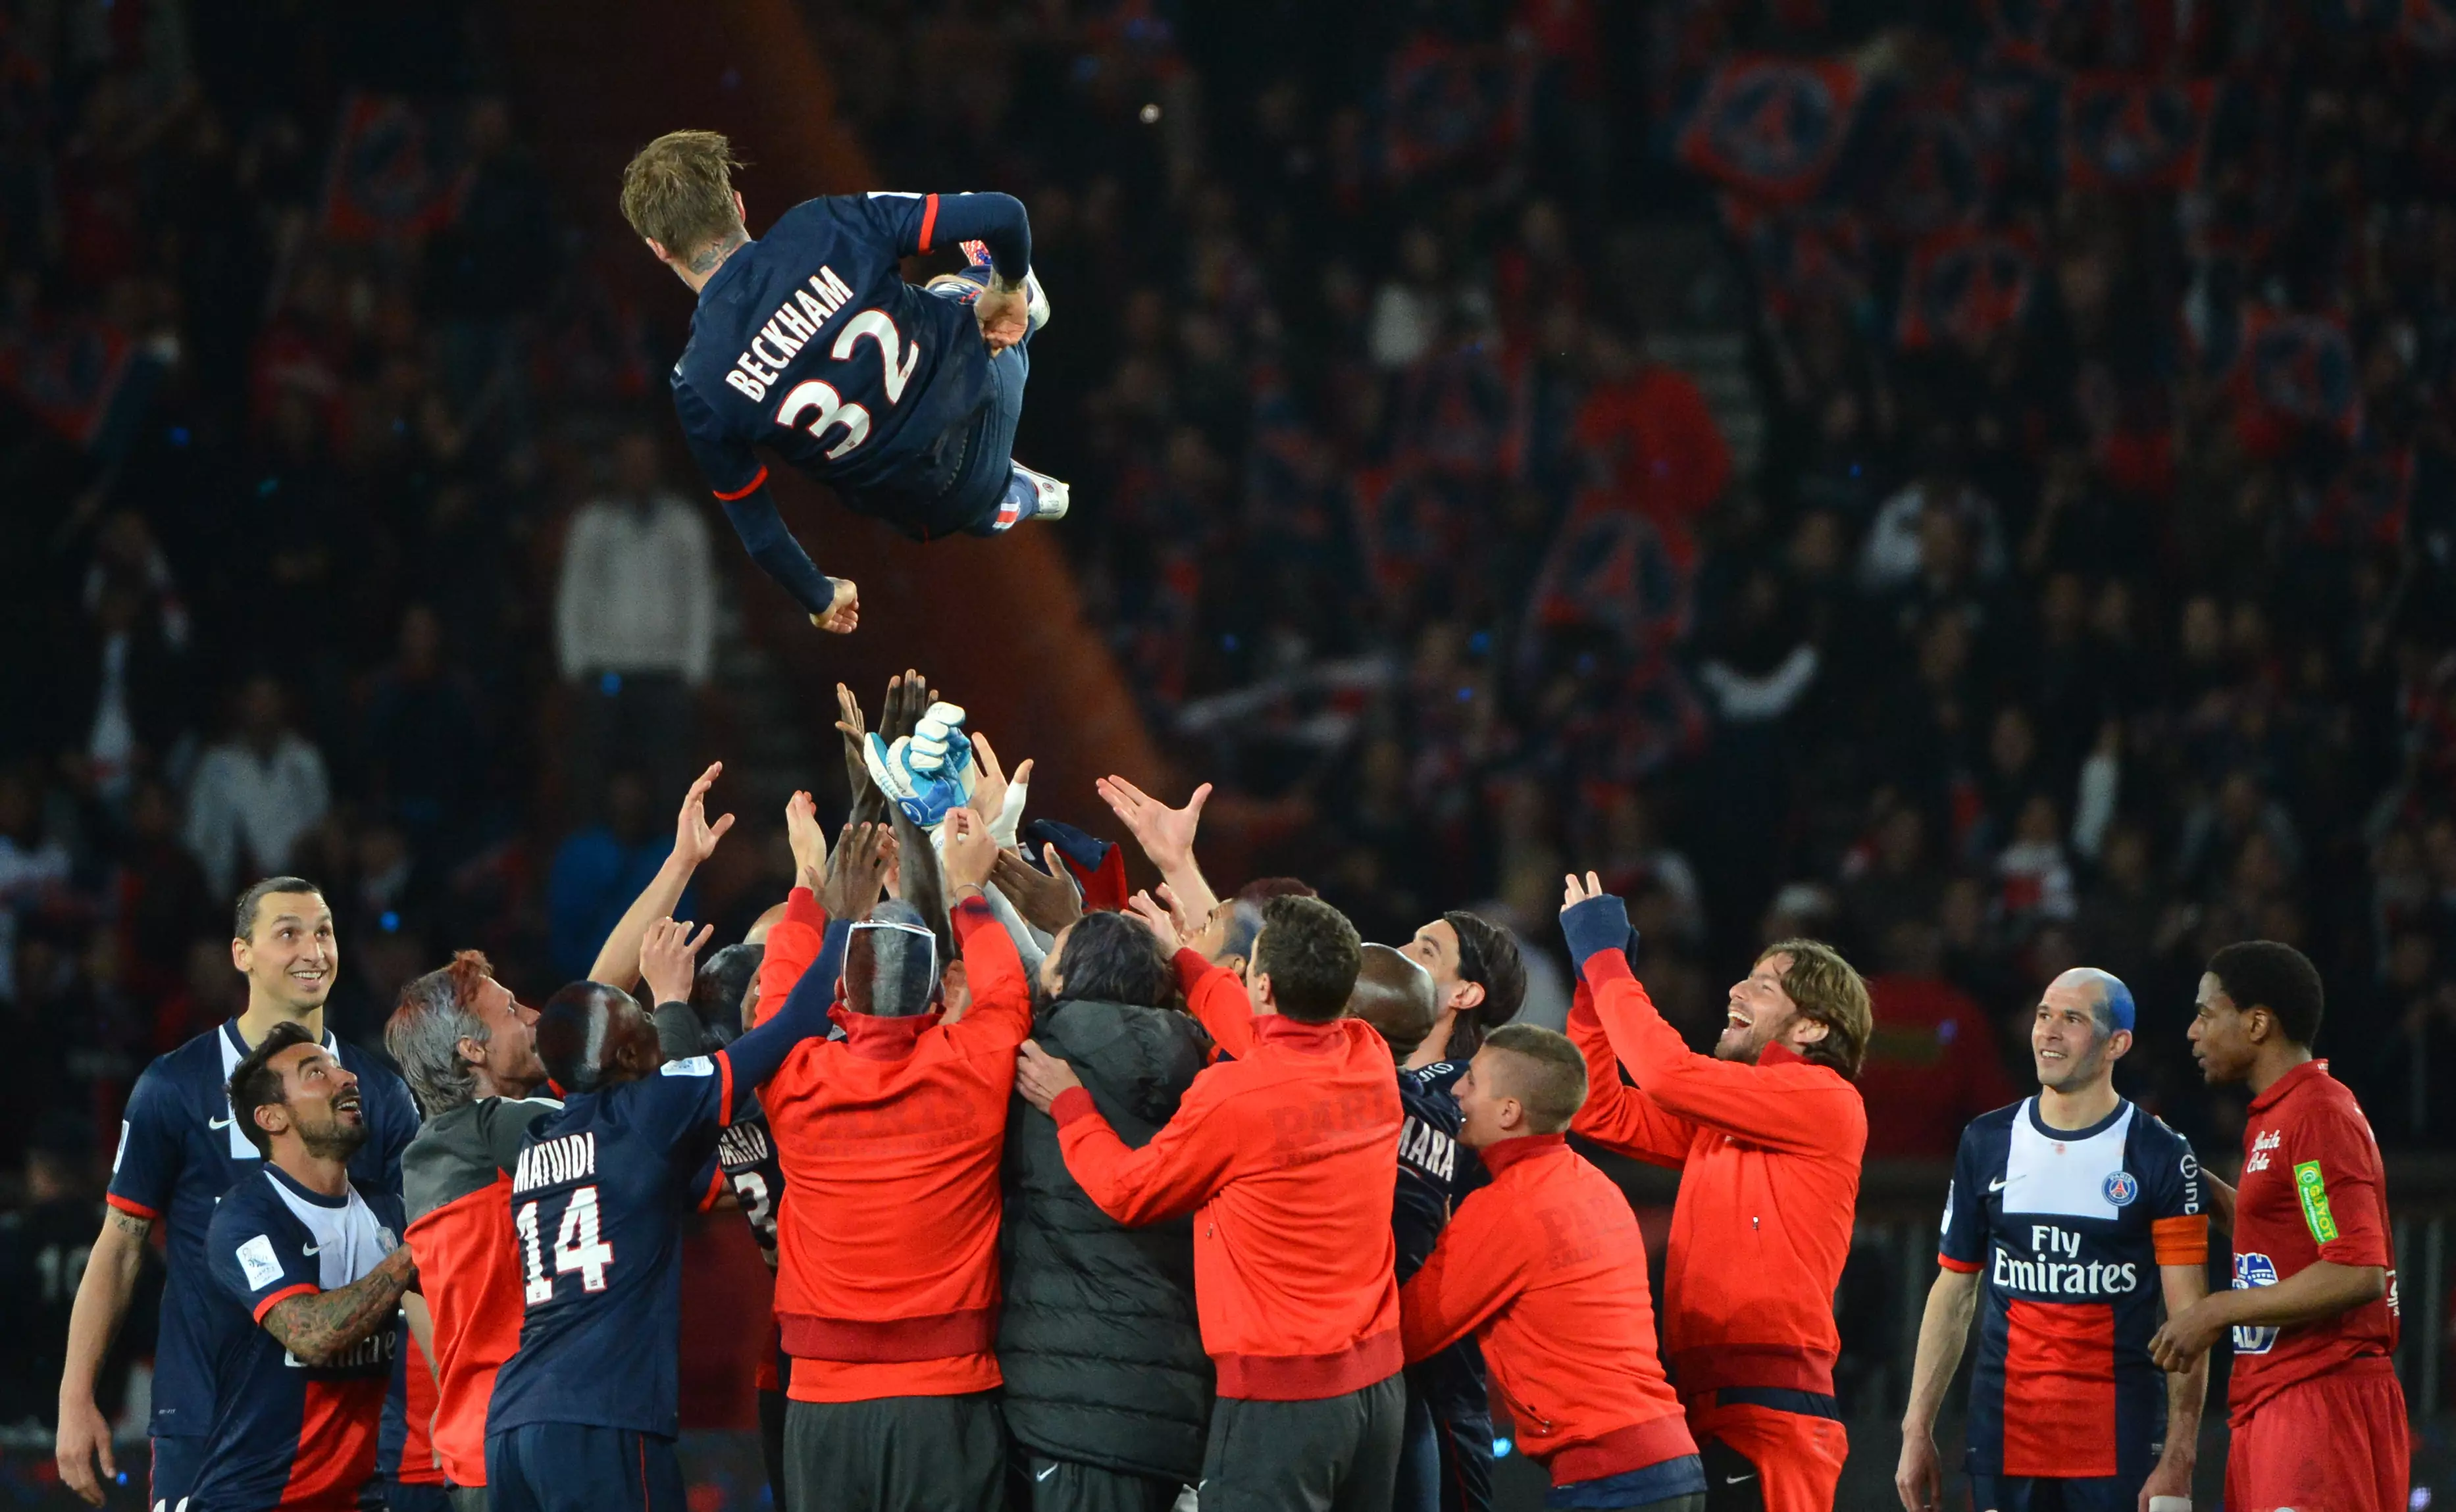 Beckham ended his career at PSG and still has a good relationship with the side. Image: PA Images